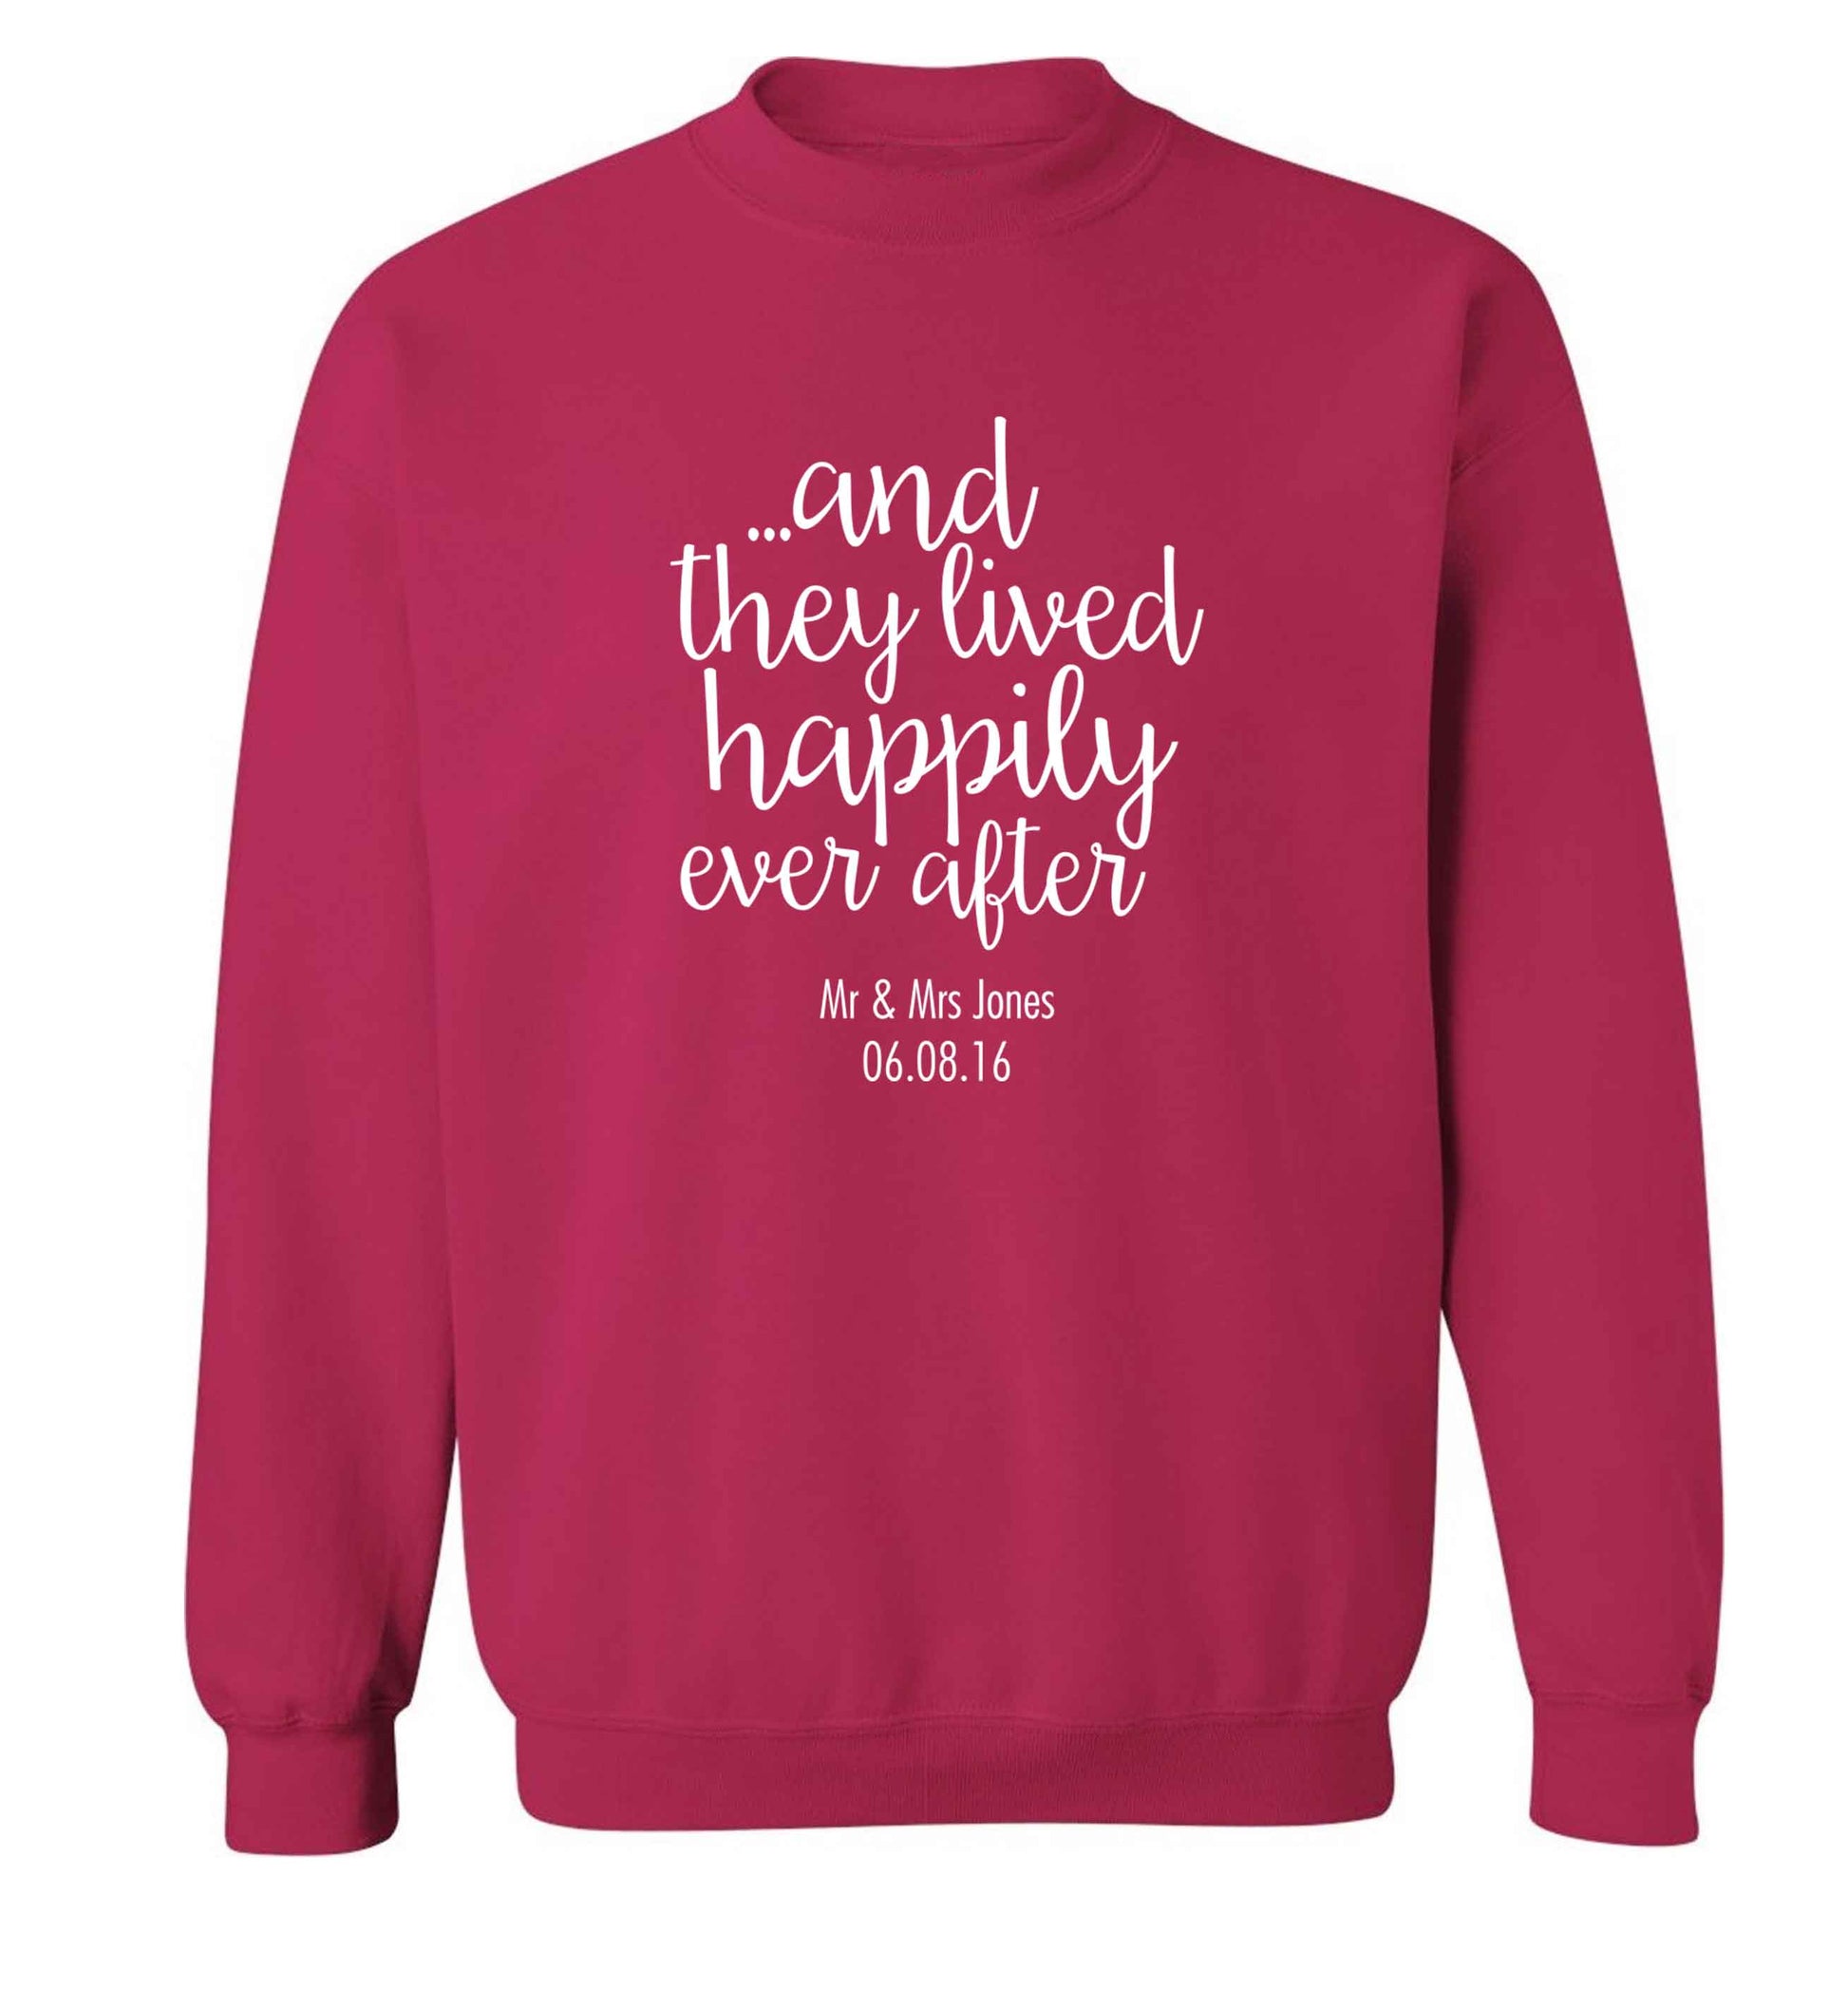 ...and they lived happily ever after - personalised date and names adult's unisex pink sweater 2XL